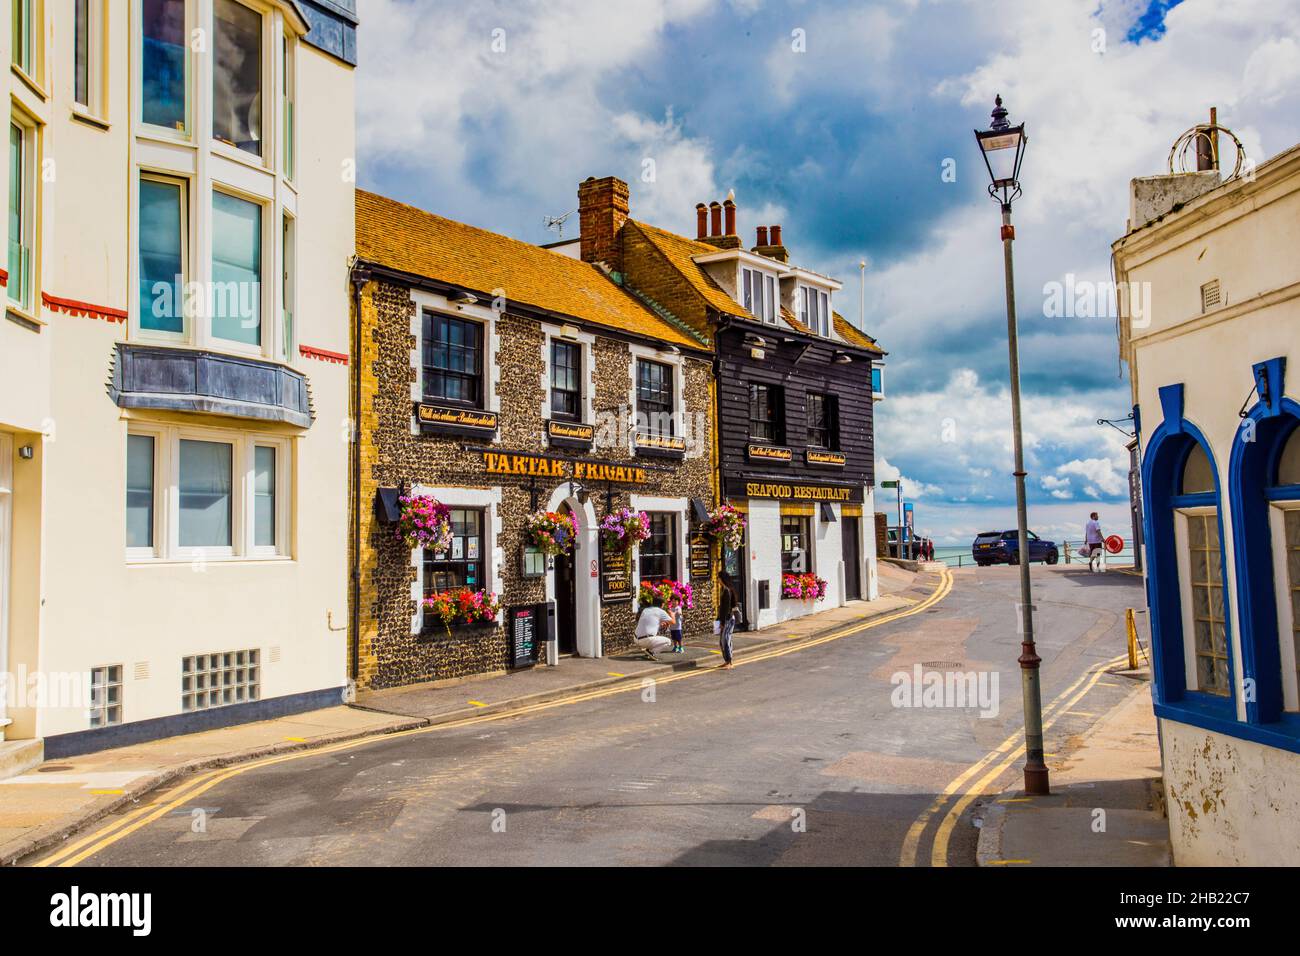 Seafood restaurant in the coastal town of Broadstairs, Thanet, Kent, UK Stock Photo